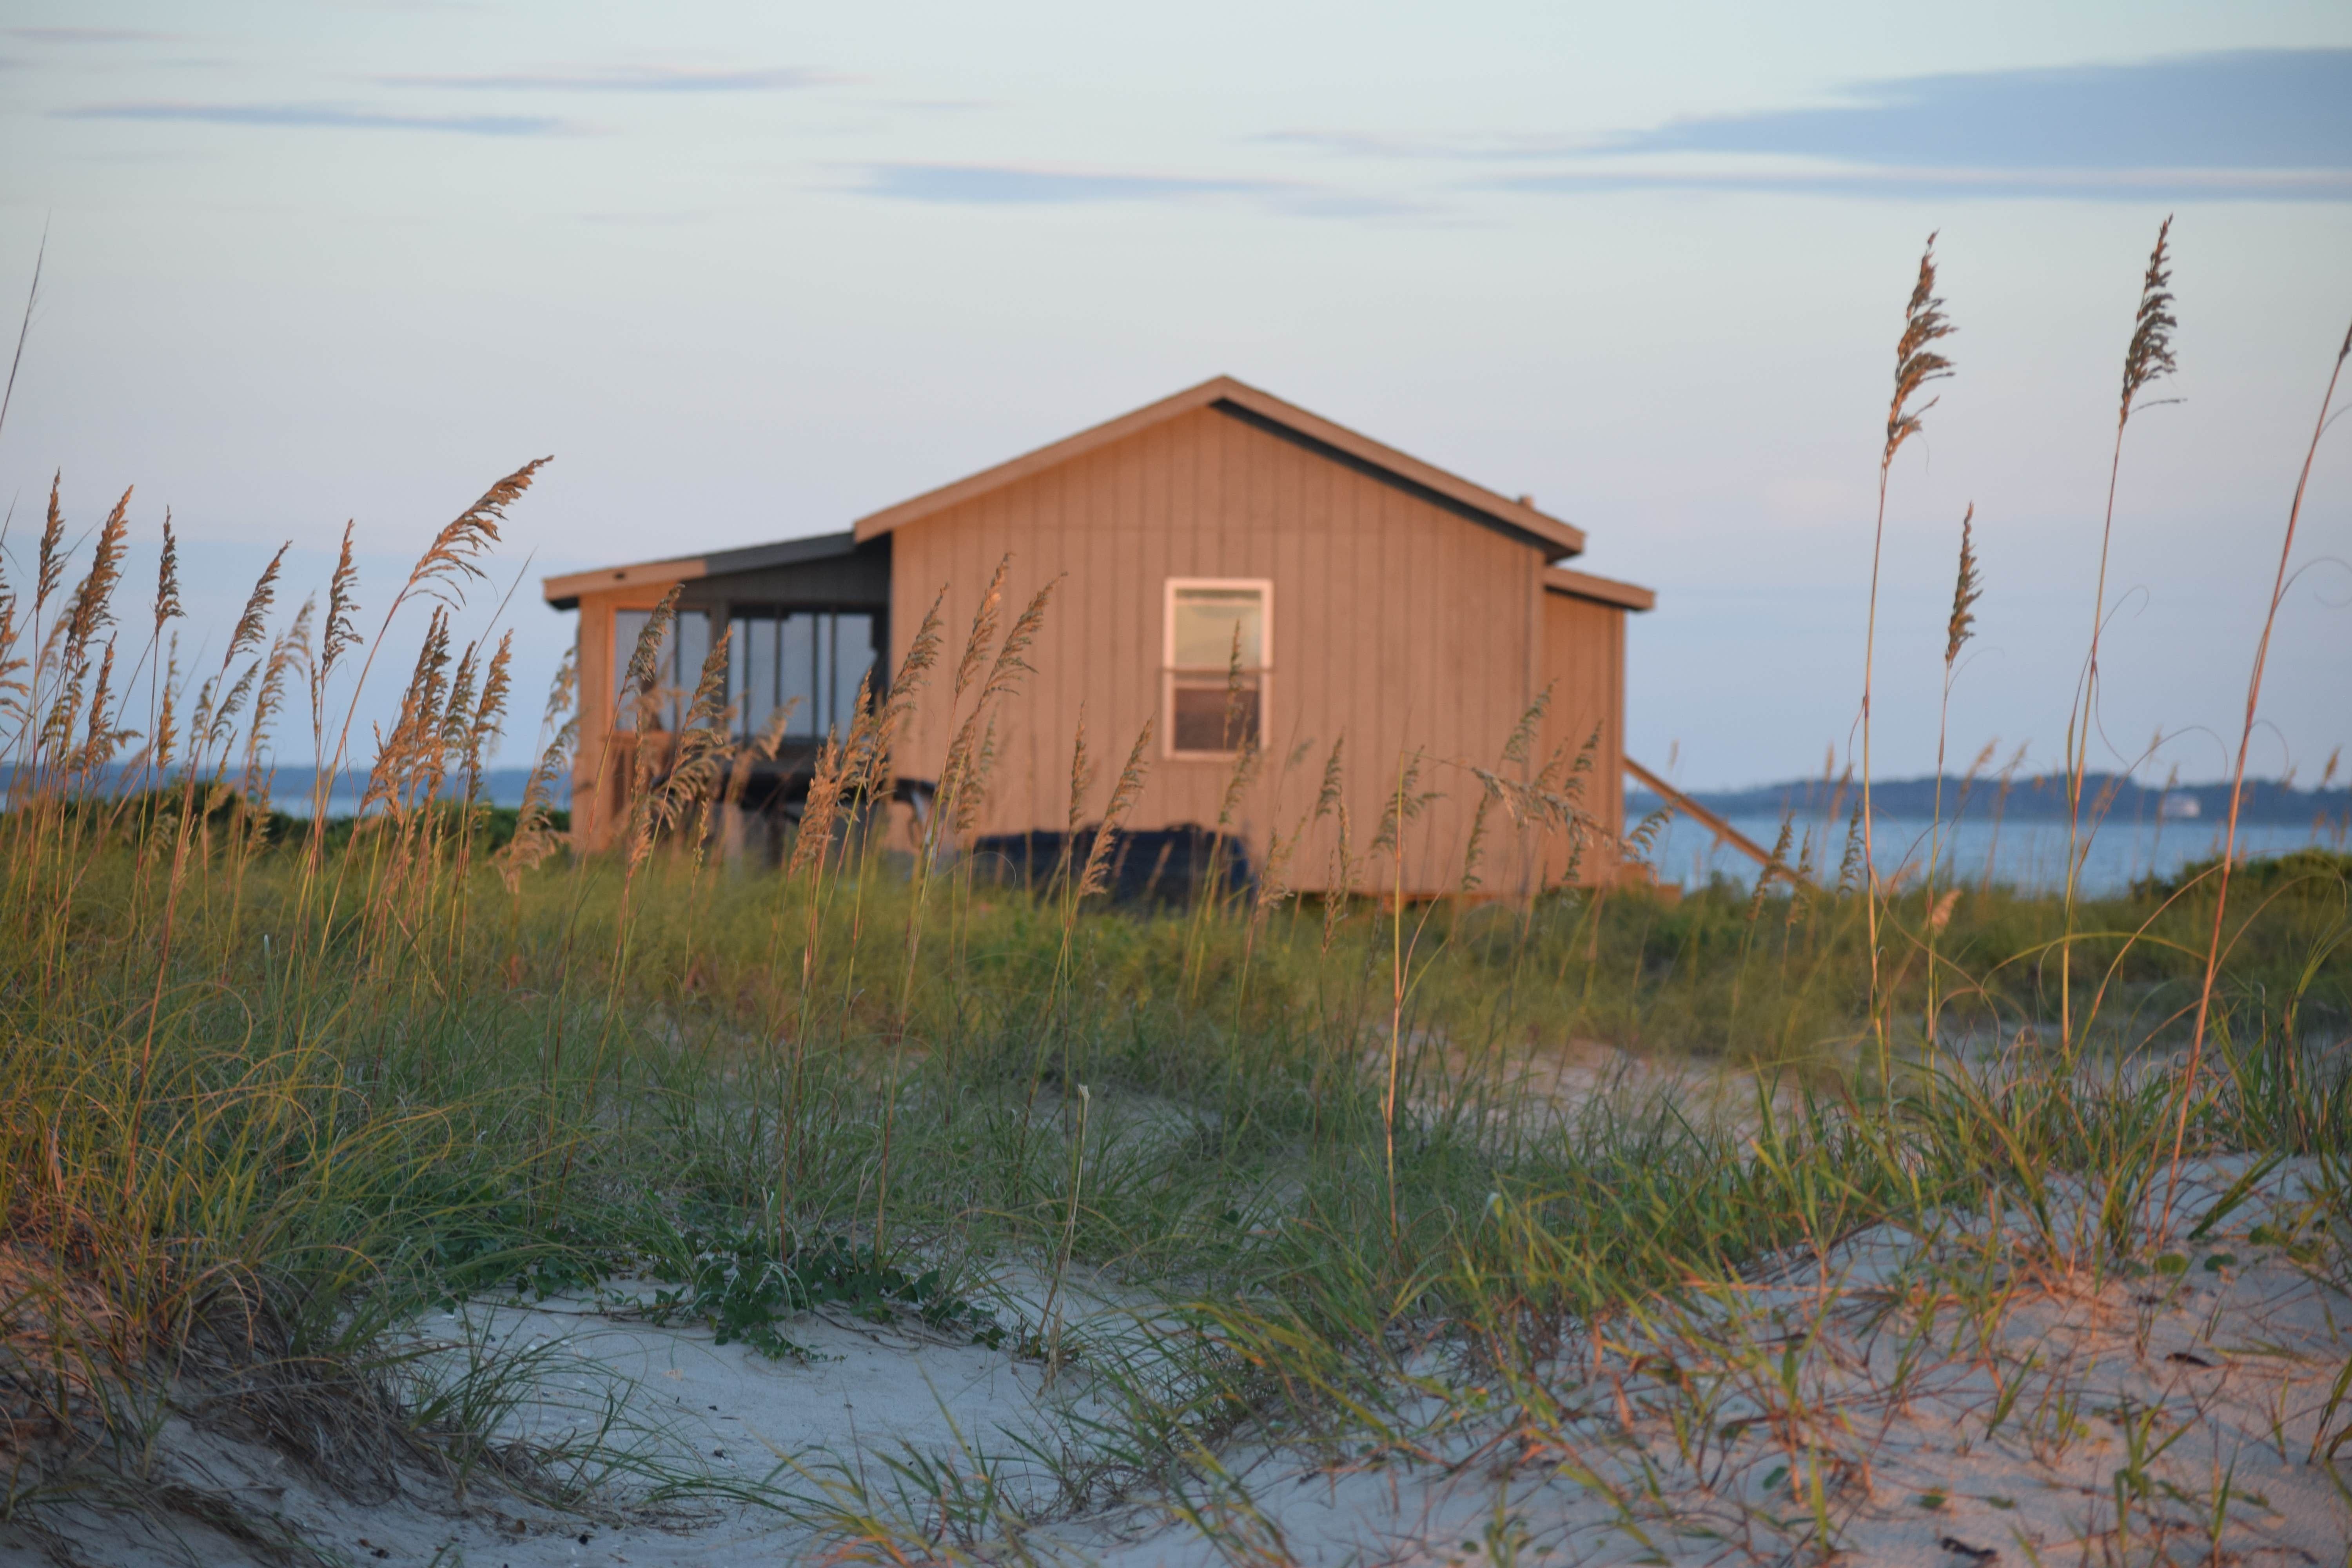 View of one of the cabins from the beach.